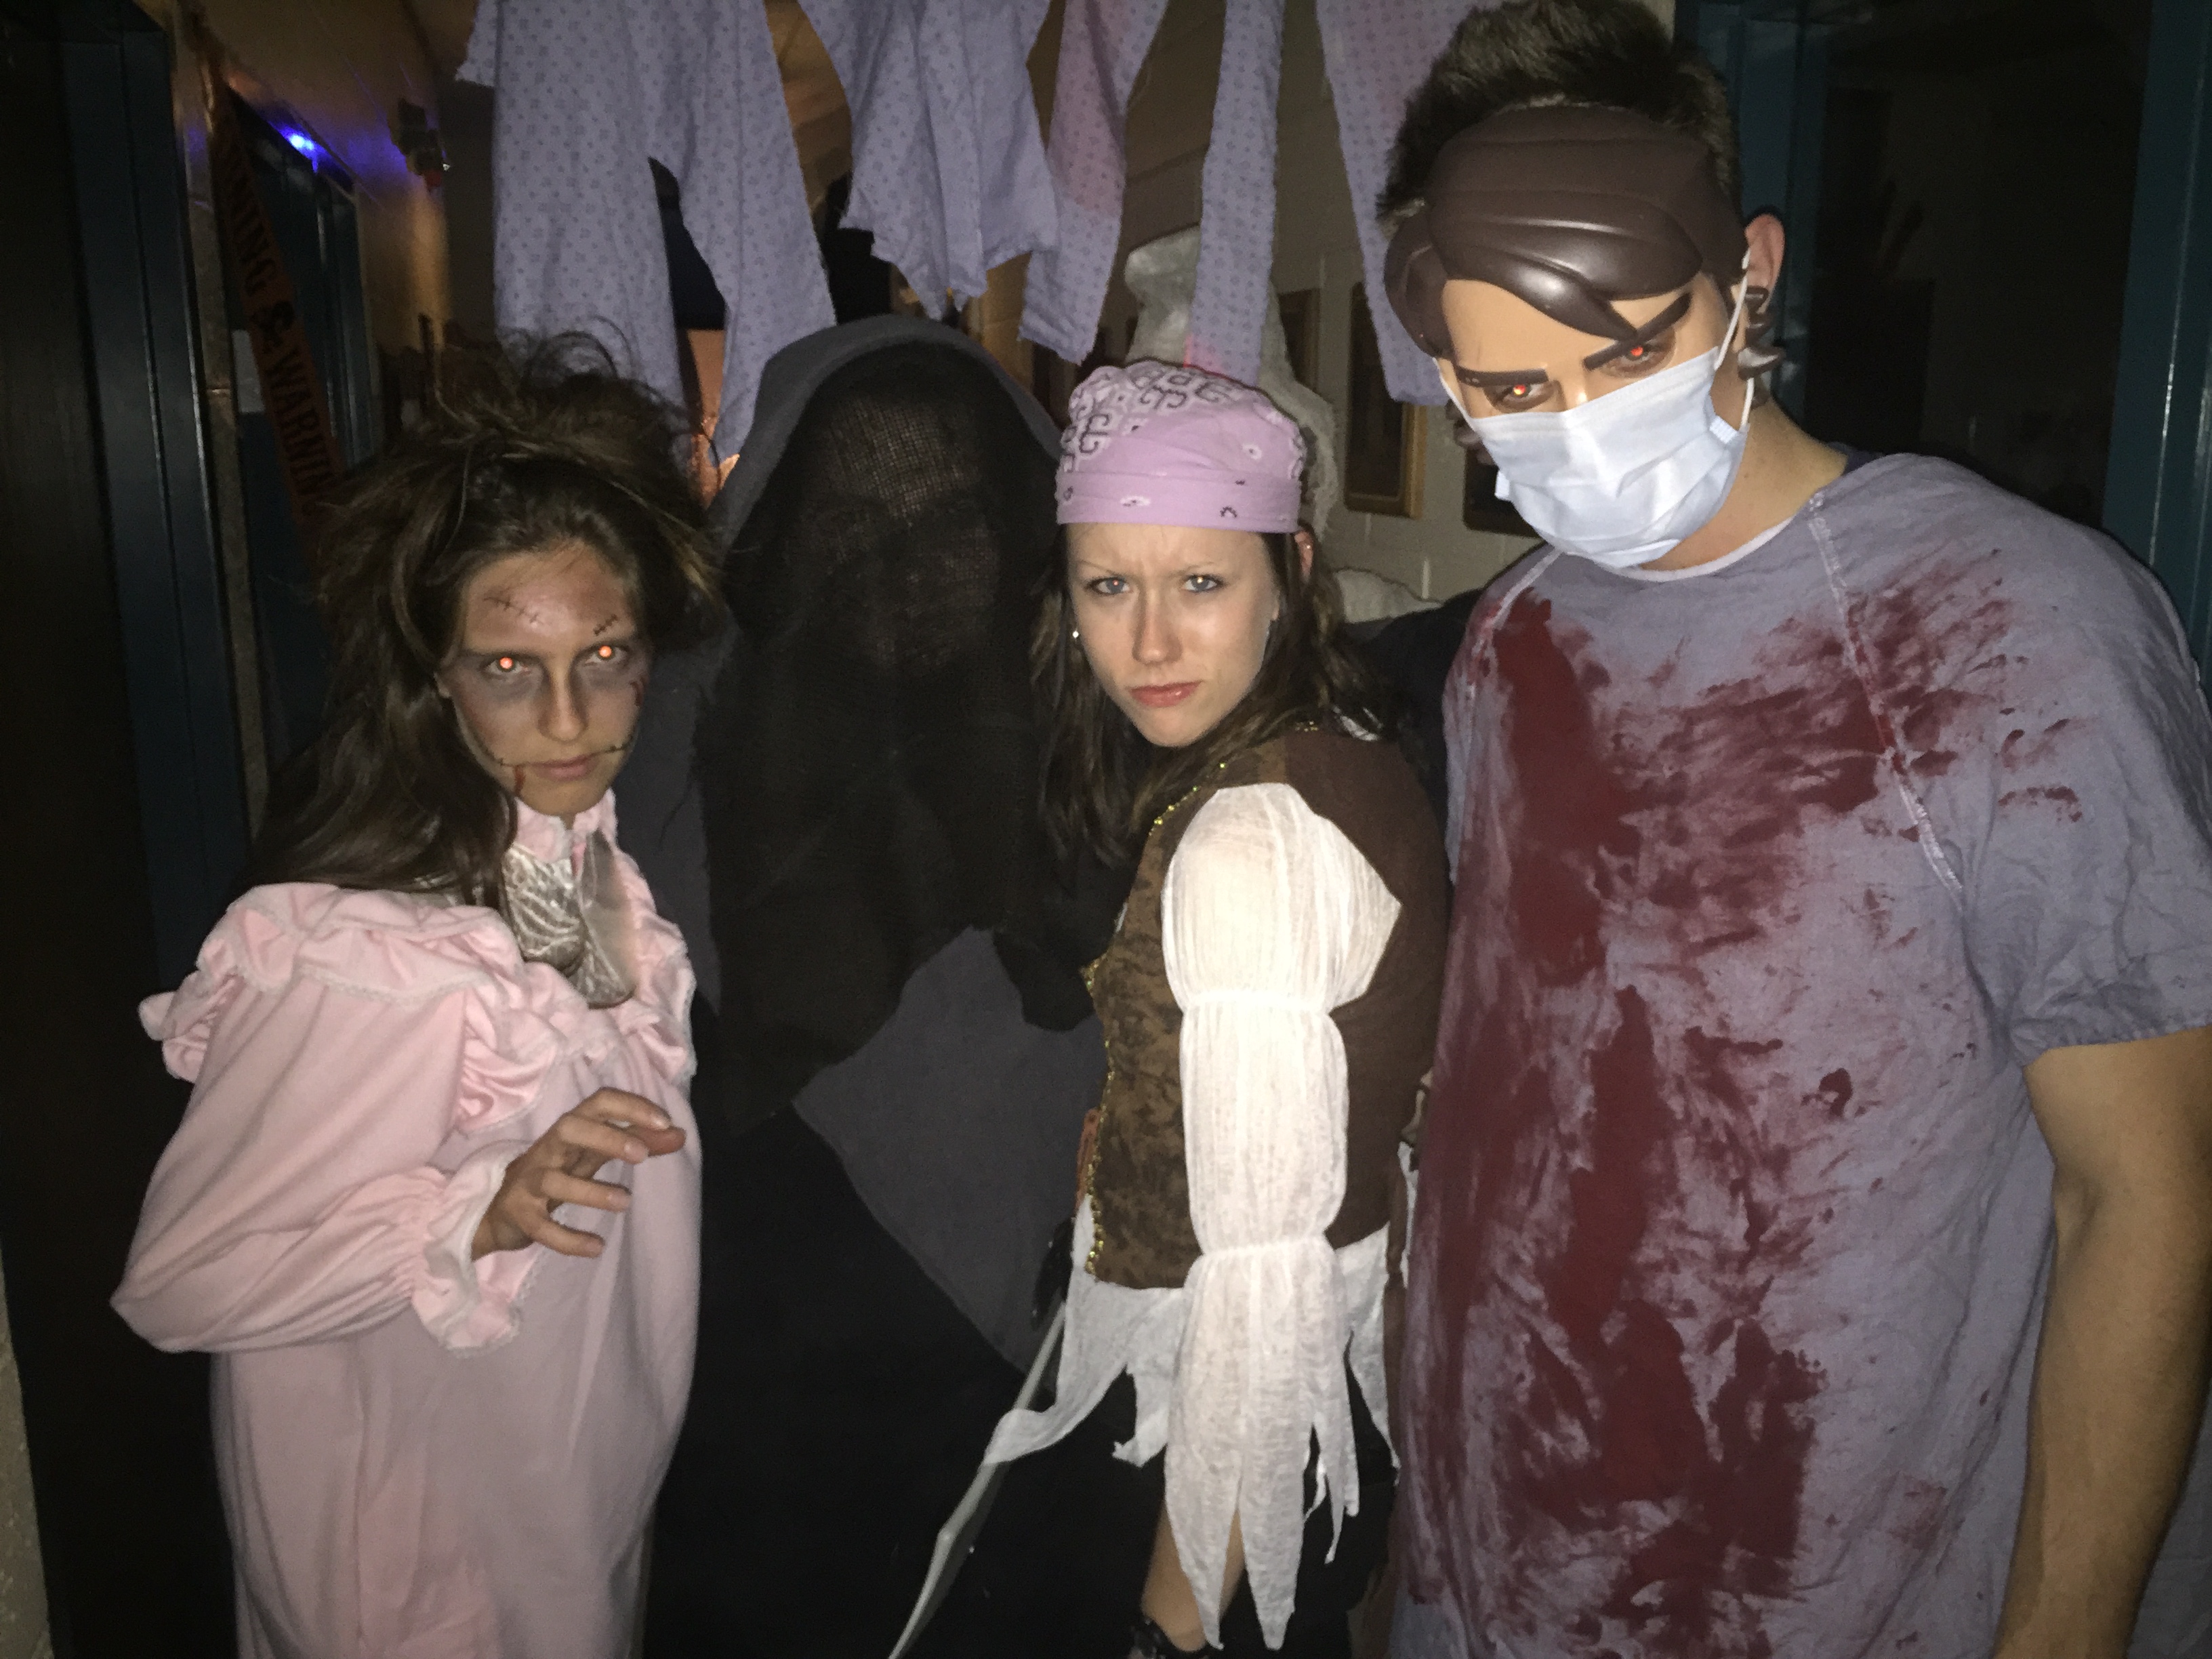 Haunted House Night One Success